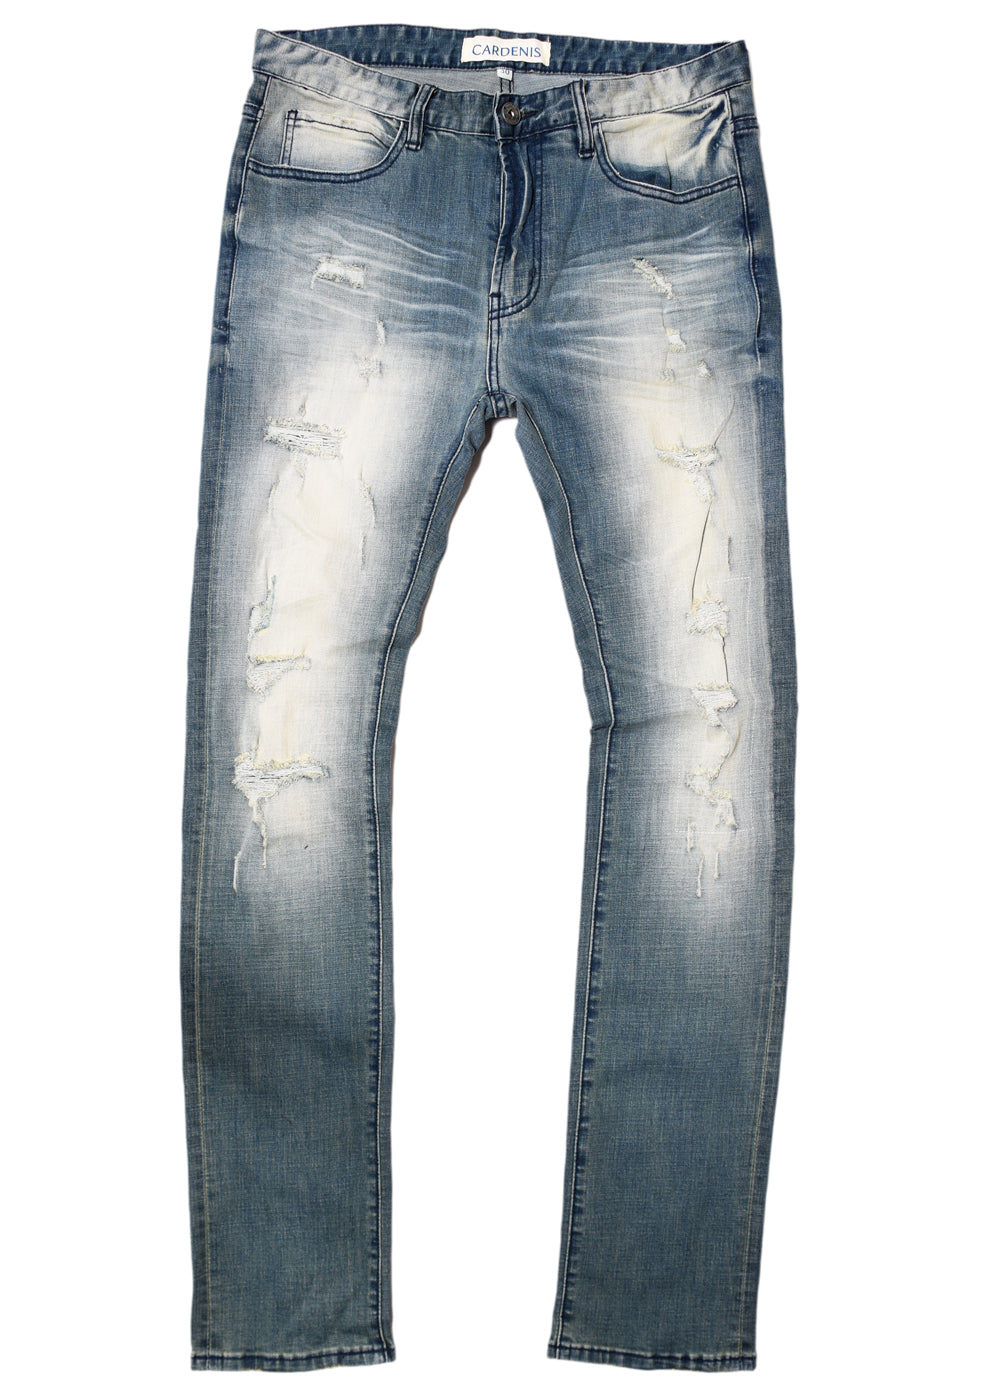 Late Night Manhattan Tainted Wash Jeans By Cardenis – Cardenis Denim